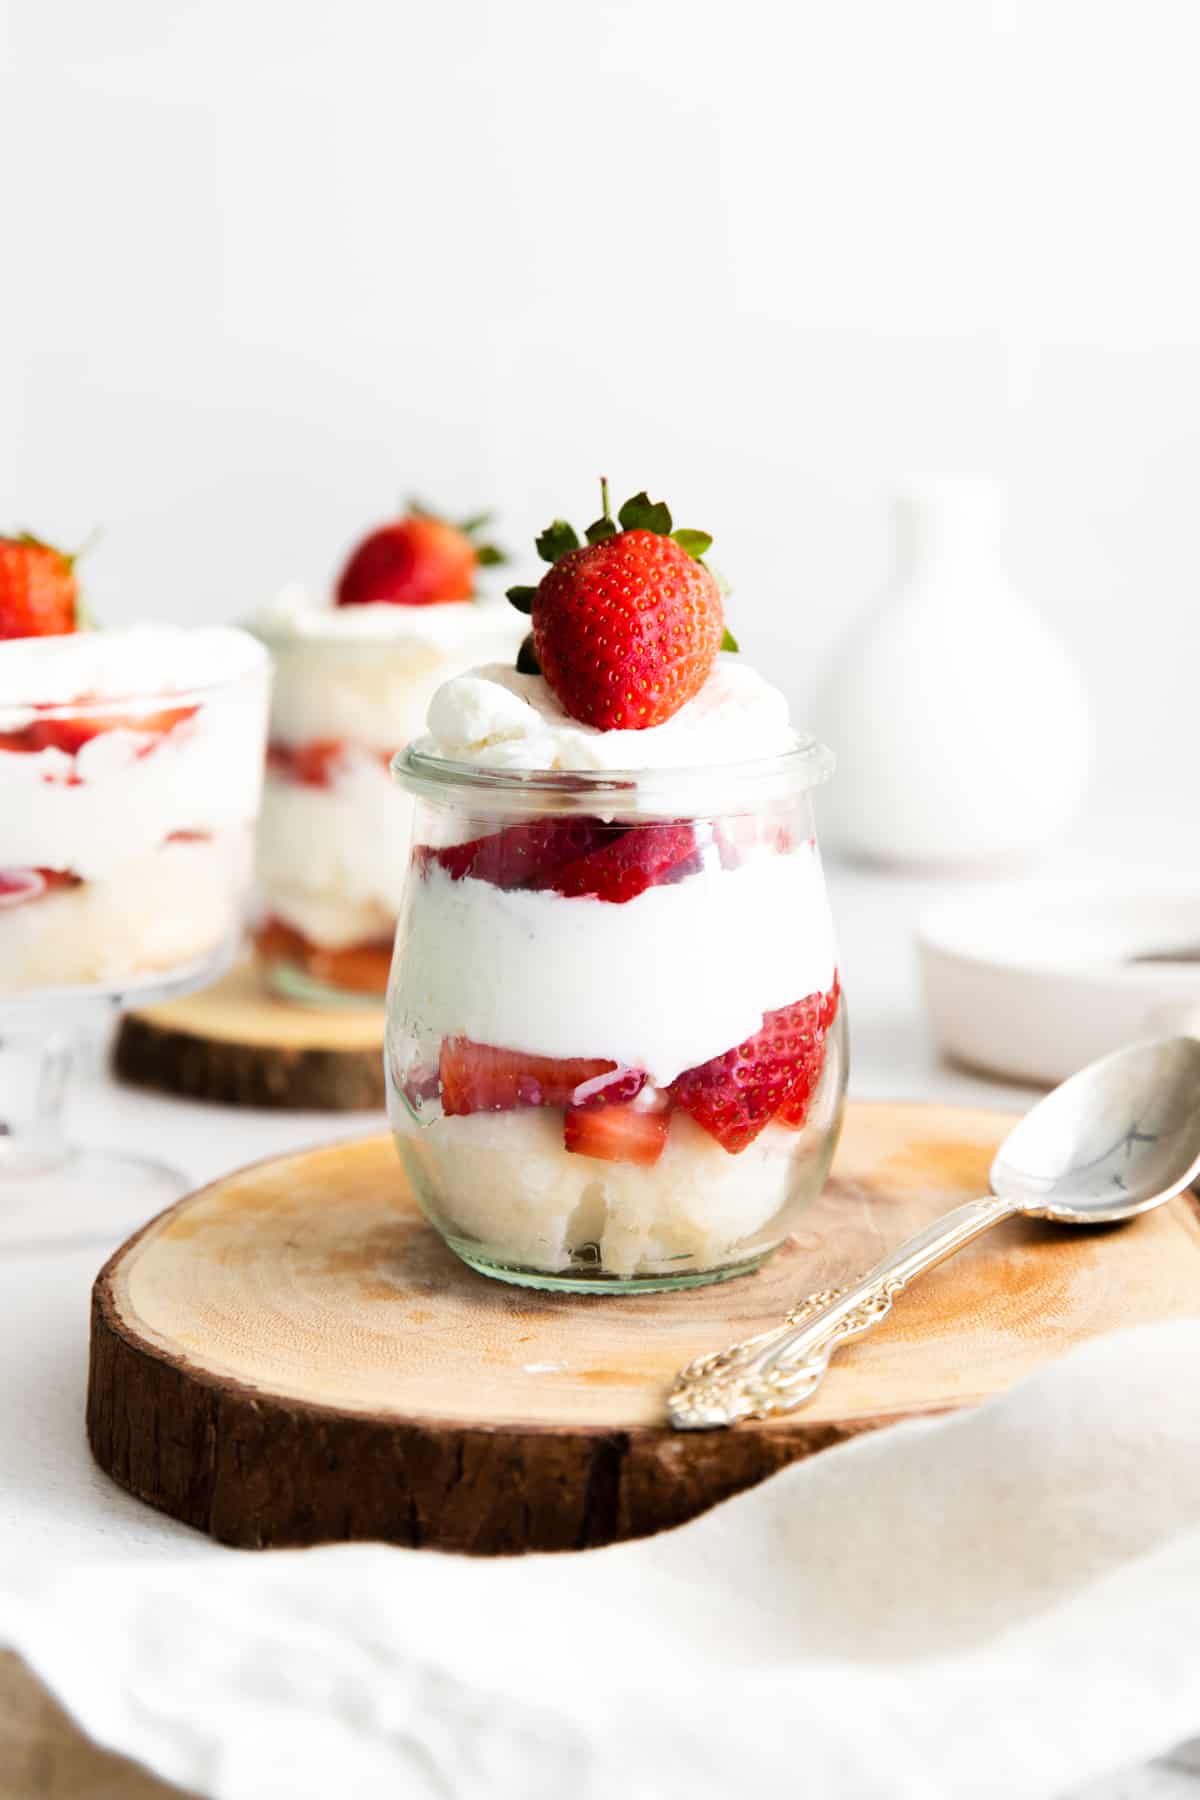 mini strawberry shortcake trifles in glass jars, showing their layers of angel food cake, fresh strawberries, and whipped cream